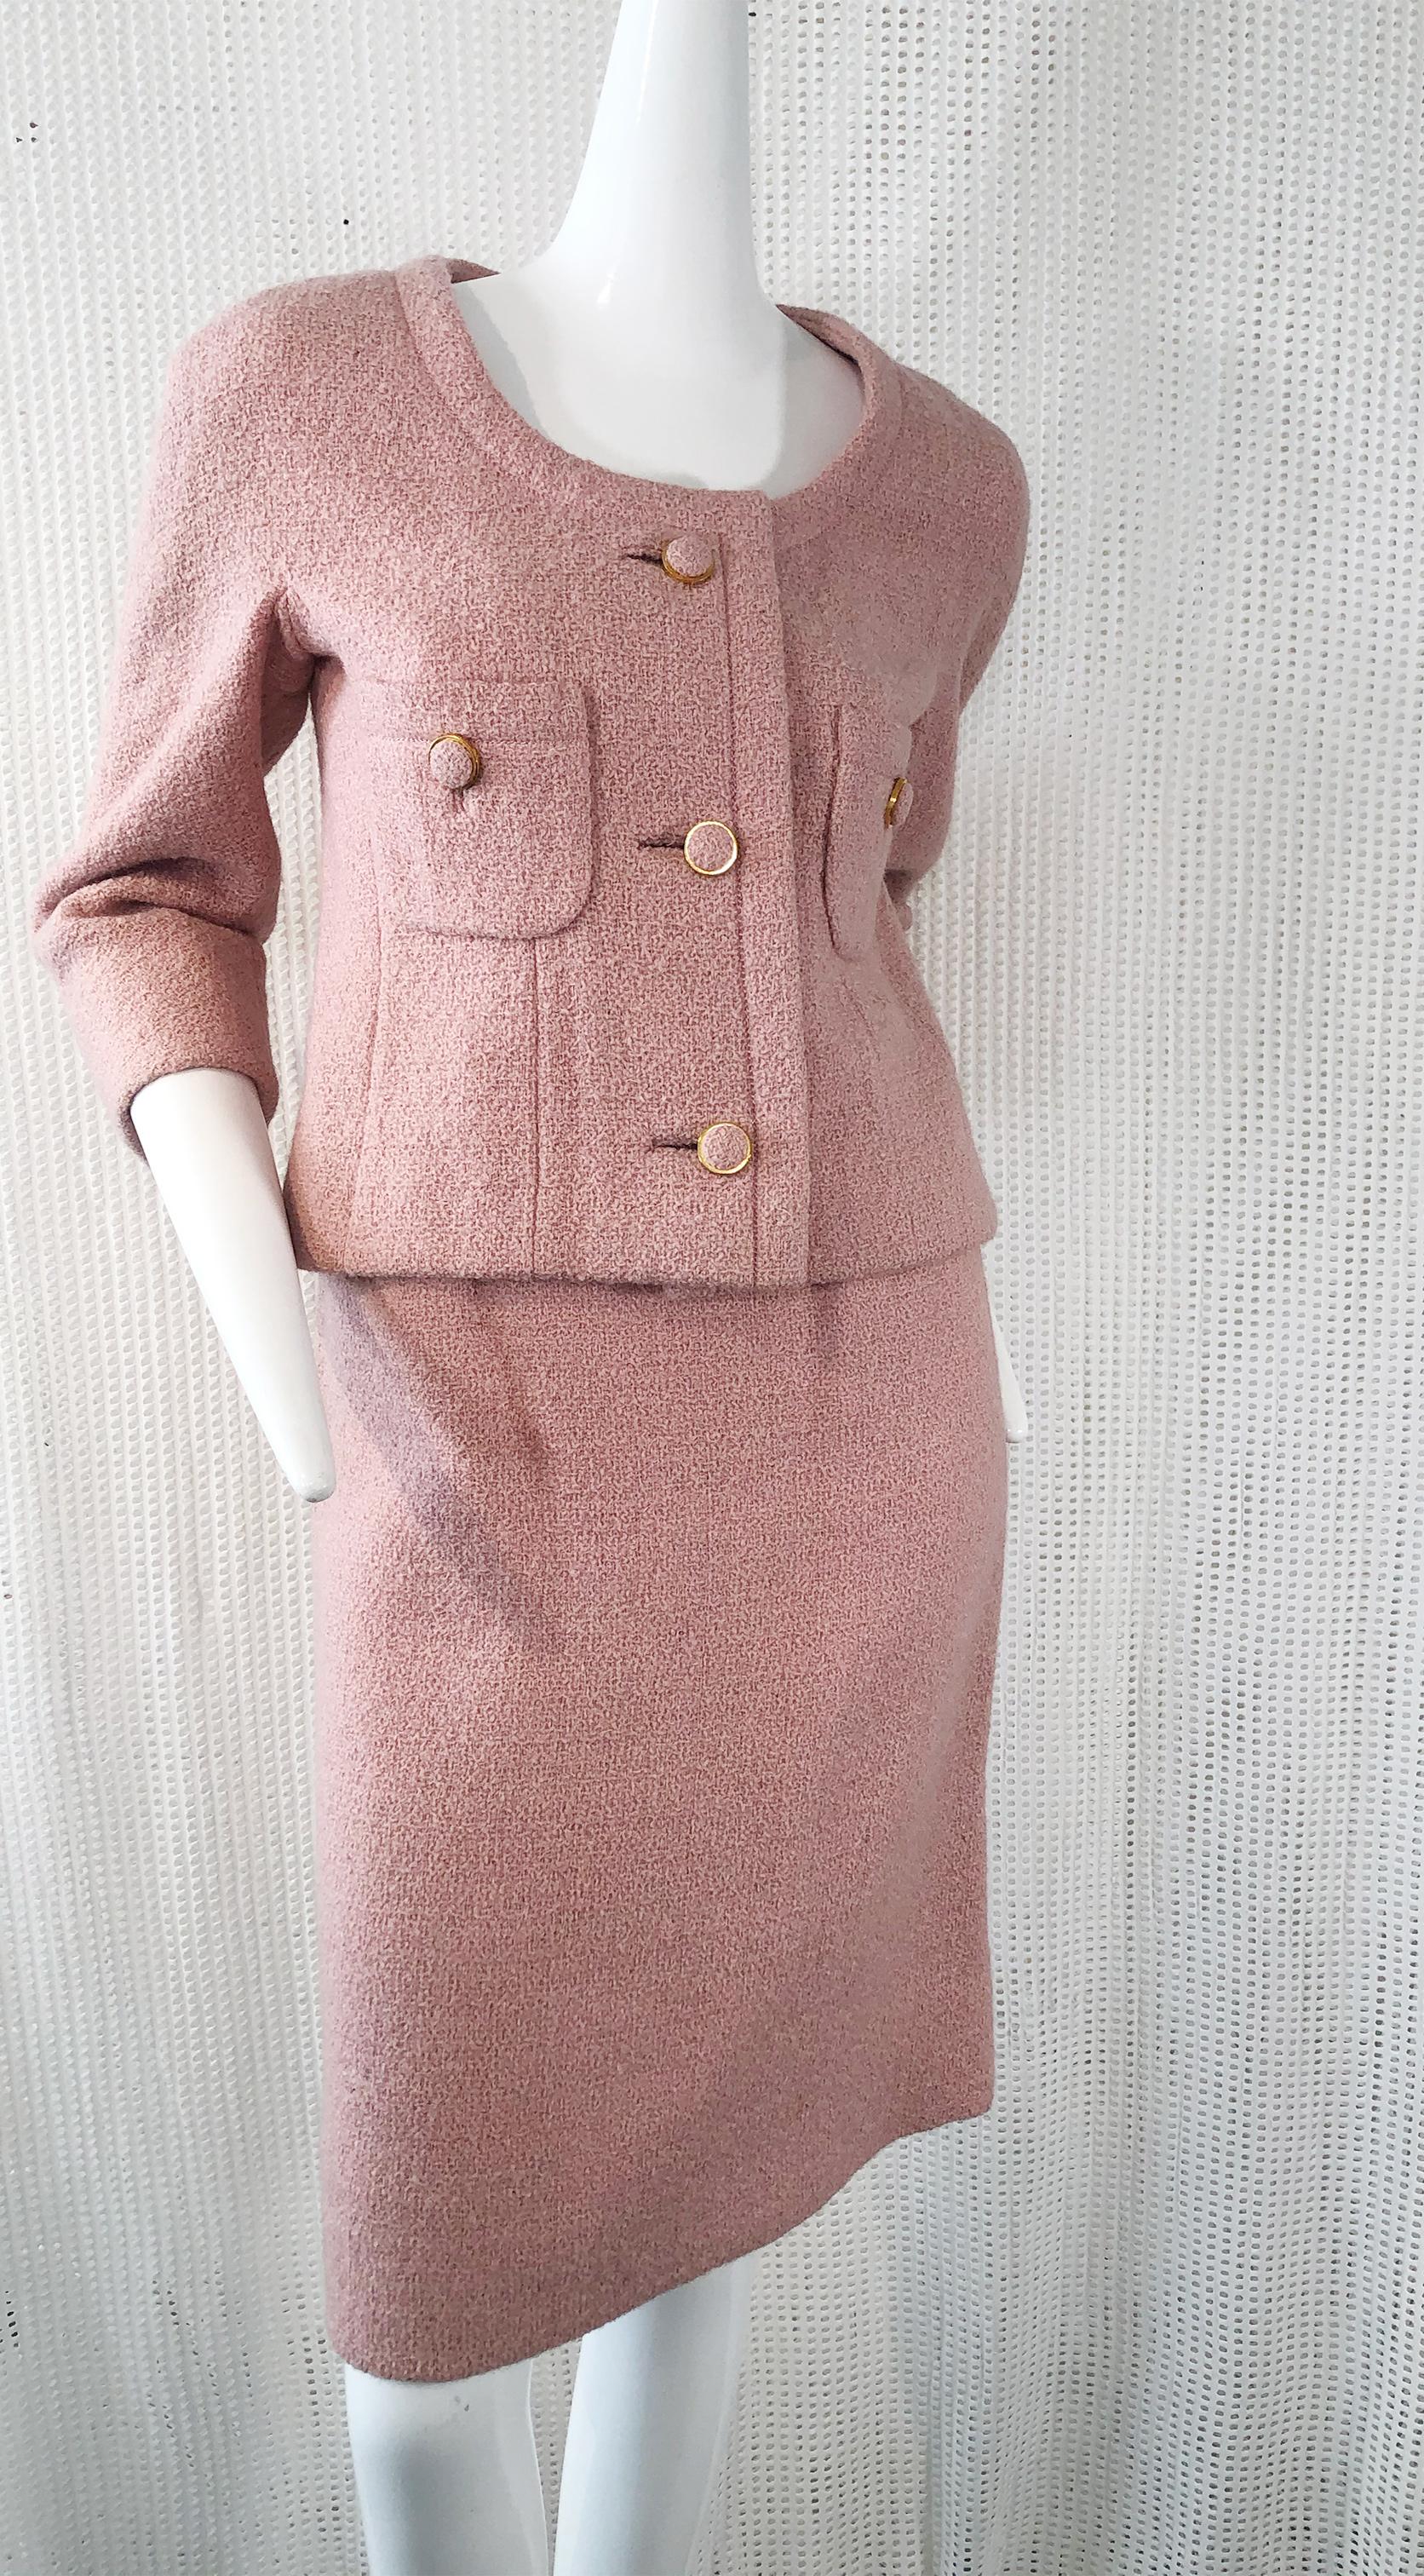 An exquisite 1960s classic Christian Dior dusty rose spring-weight wool bouclé mini skirt suit. Collar-less, classic design in a Chanel style with front applied pockets and covered buttons. Fully lined, of course. Skirt is just above the knee in a